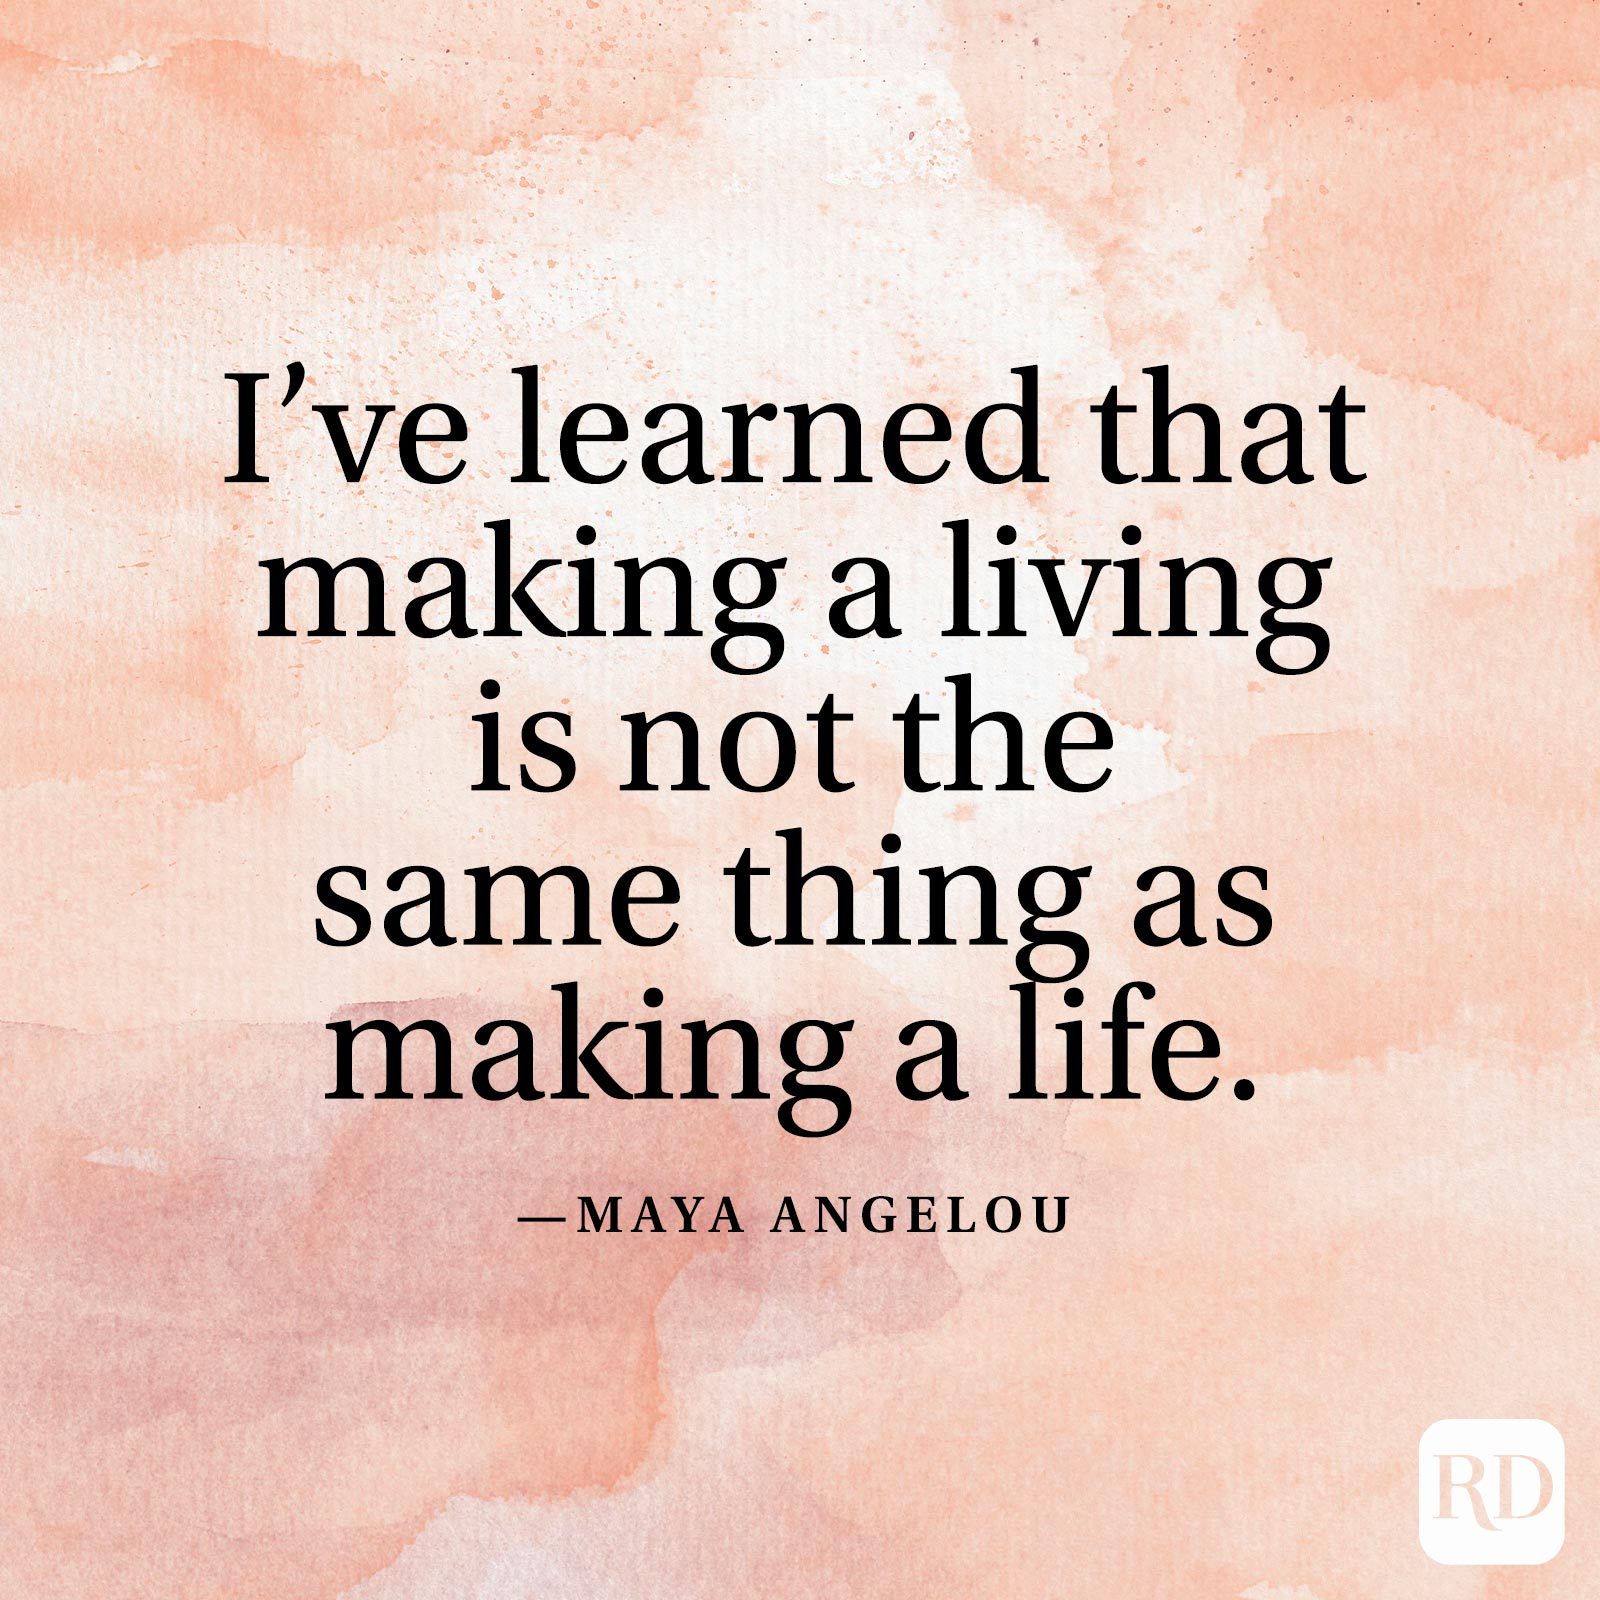 "I've learned that making a living is not the same thing as making a life." —Maya Angelou